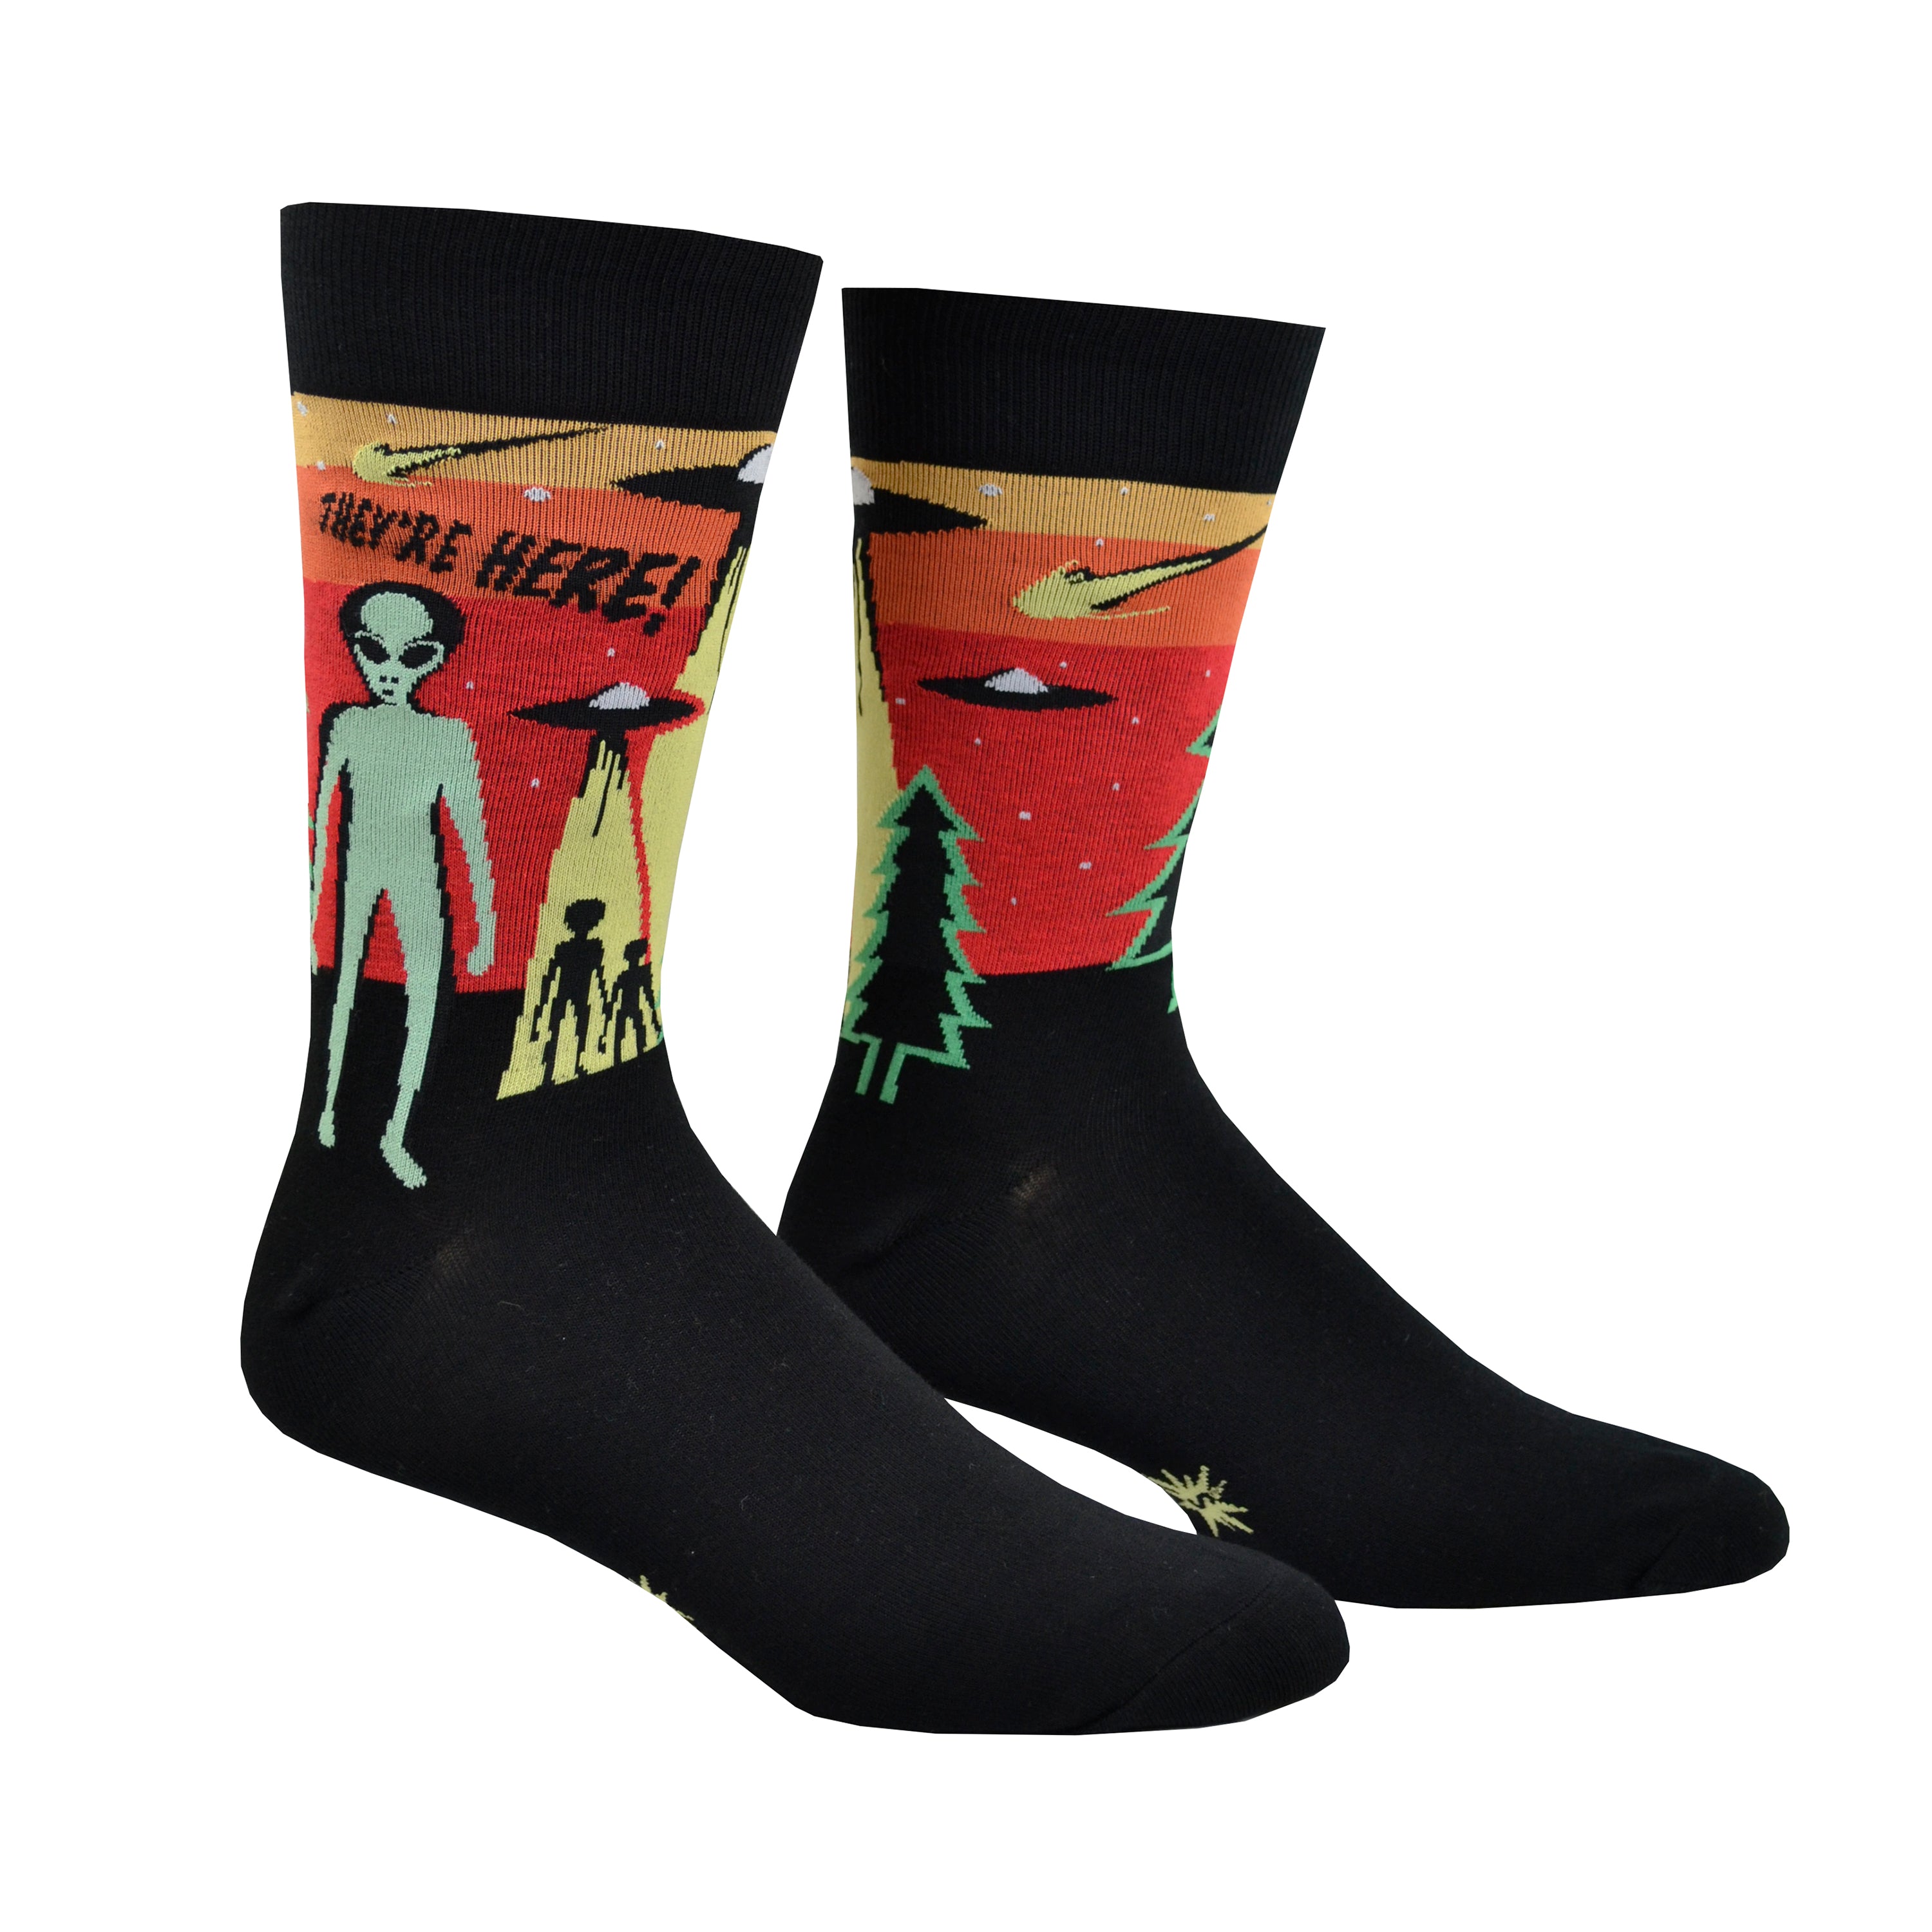 Shown on foot forms, a pair Sock It to Me cotton men's crew socks in black with a yellow, orange, and red background on the leg featuring a green alien and 2 space ships. The text on the sock reads, 